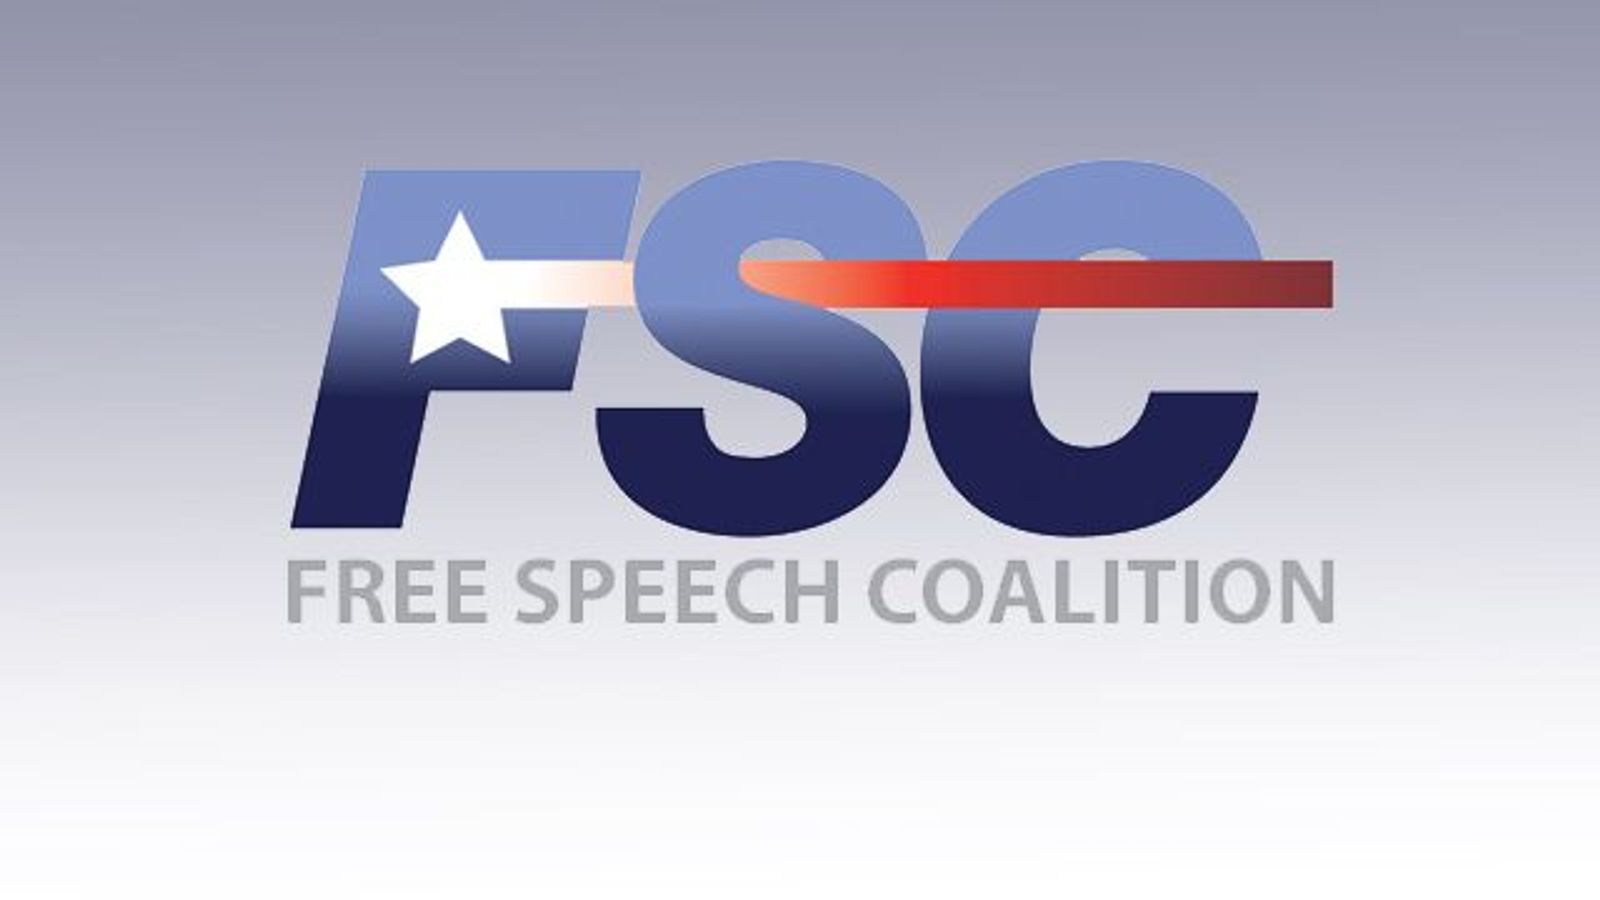 FSC Launches AB 1576 Opposition Fax/Phone Campaign